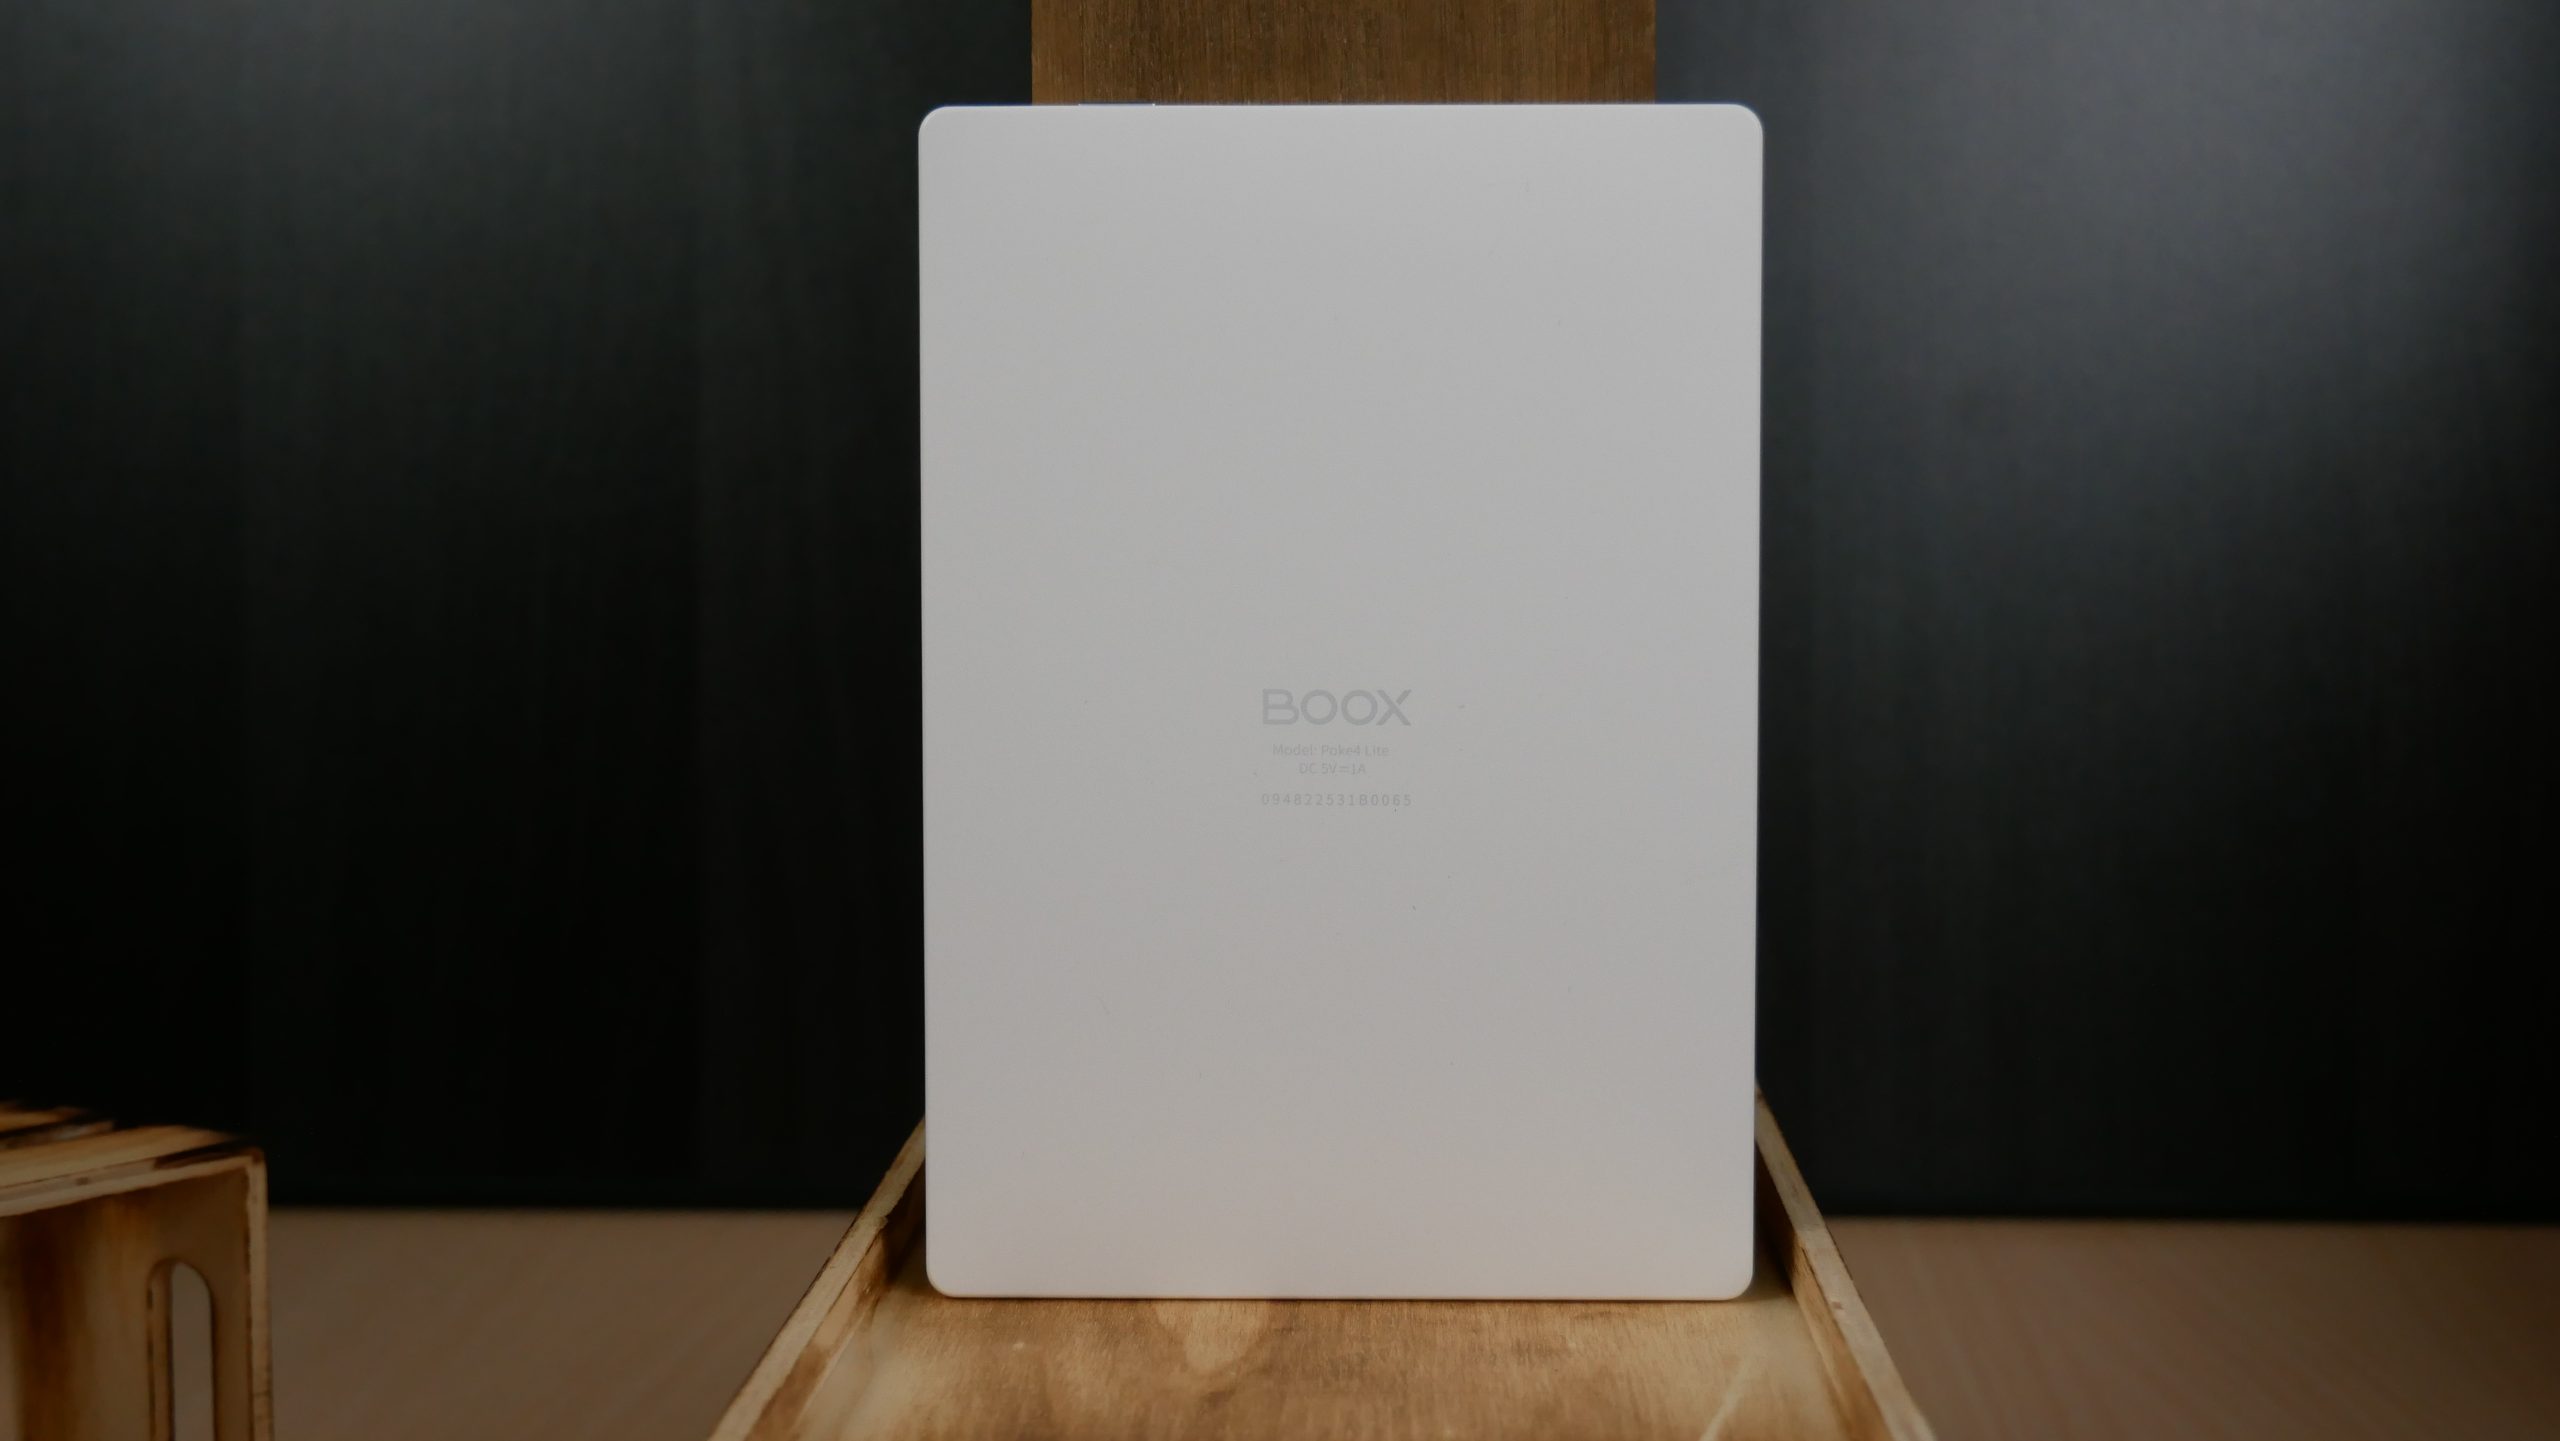 Onyx Boox Poke 4 Lite Hands on Review - Good e-Reader